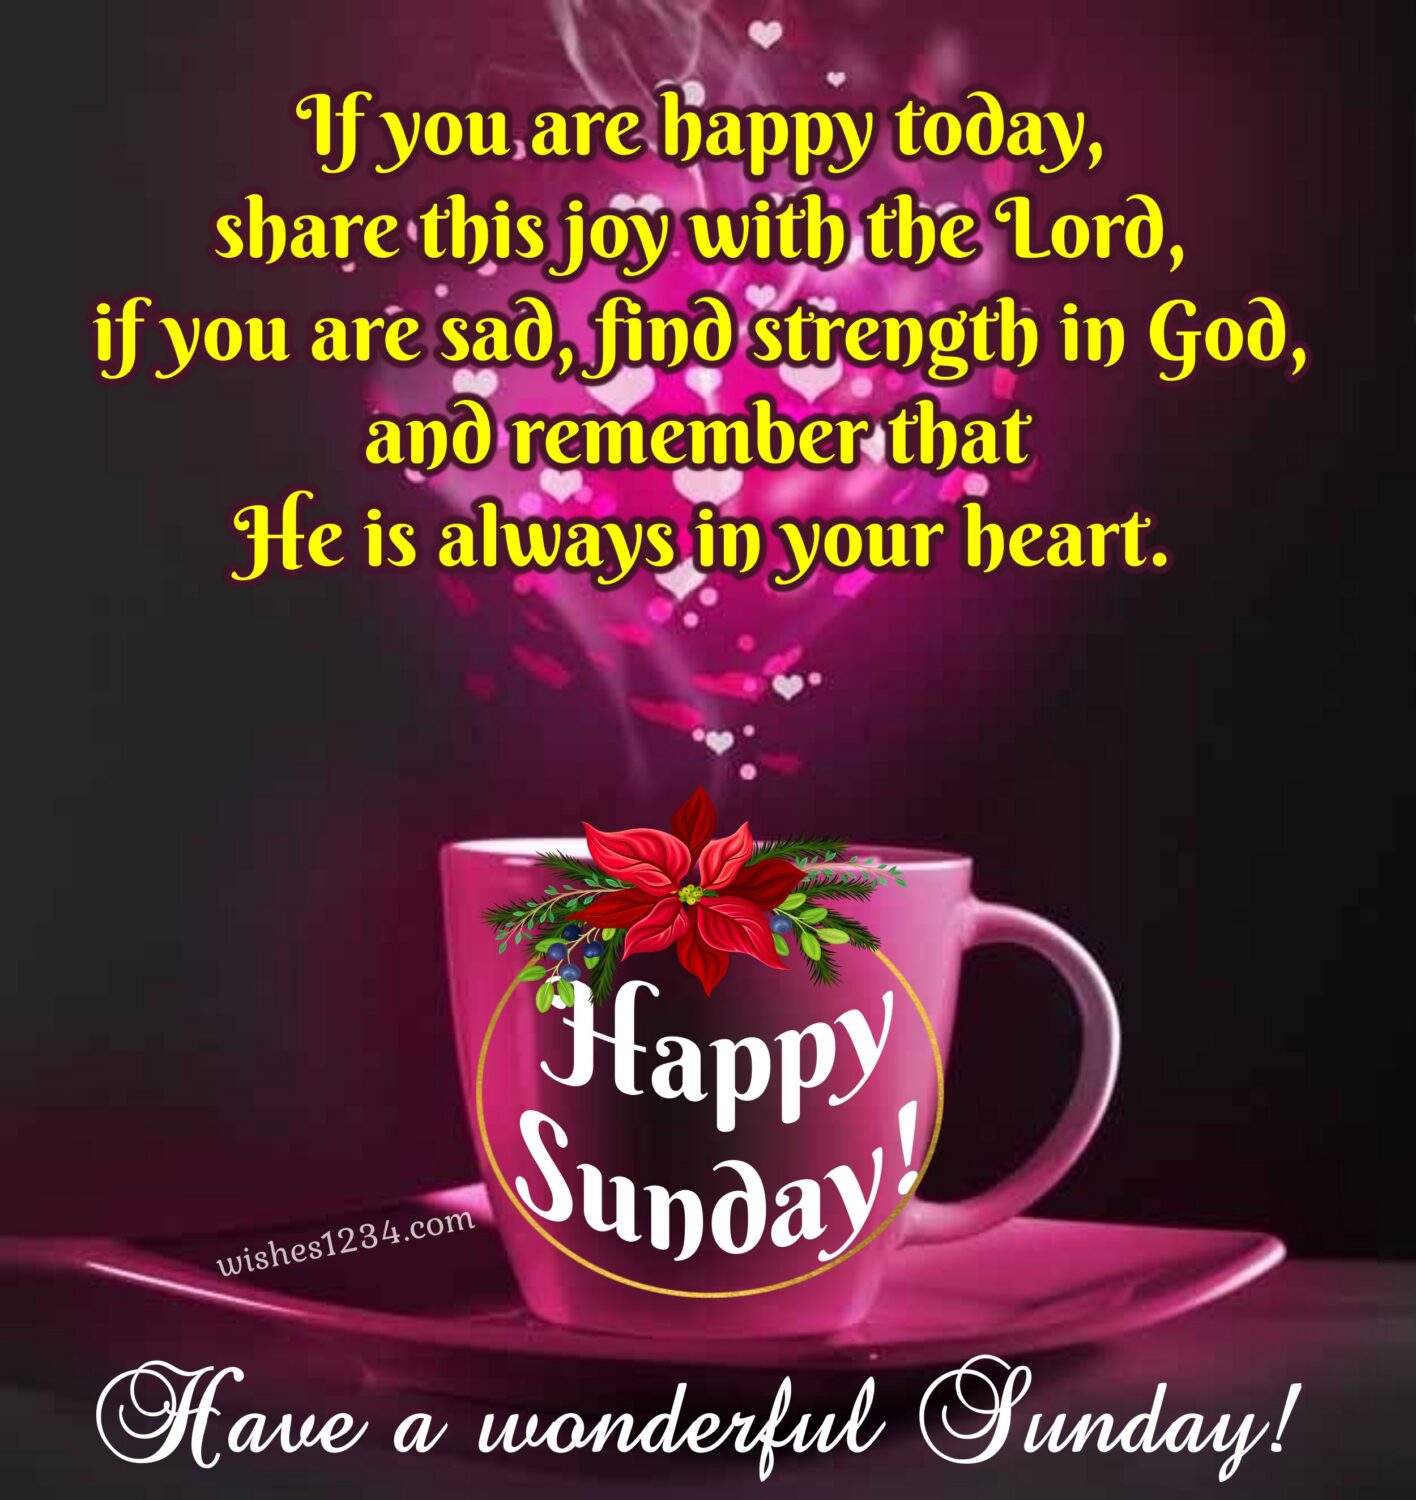 Happy Sunday blessings with purple tea cup, Happy sunday.